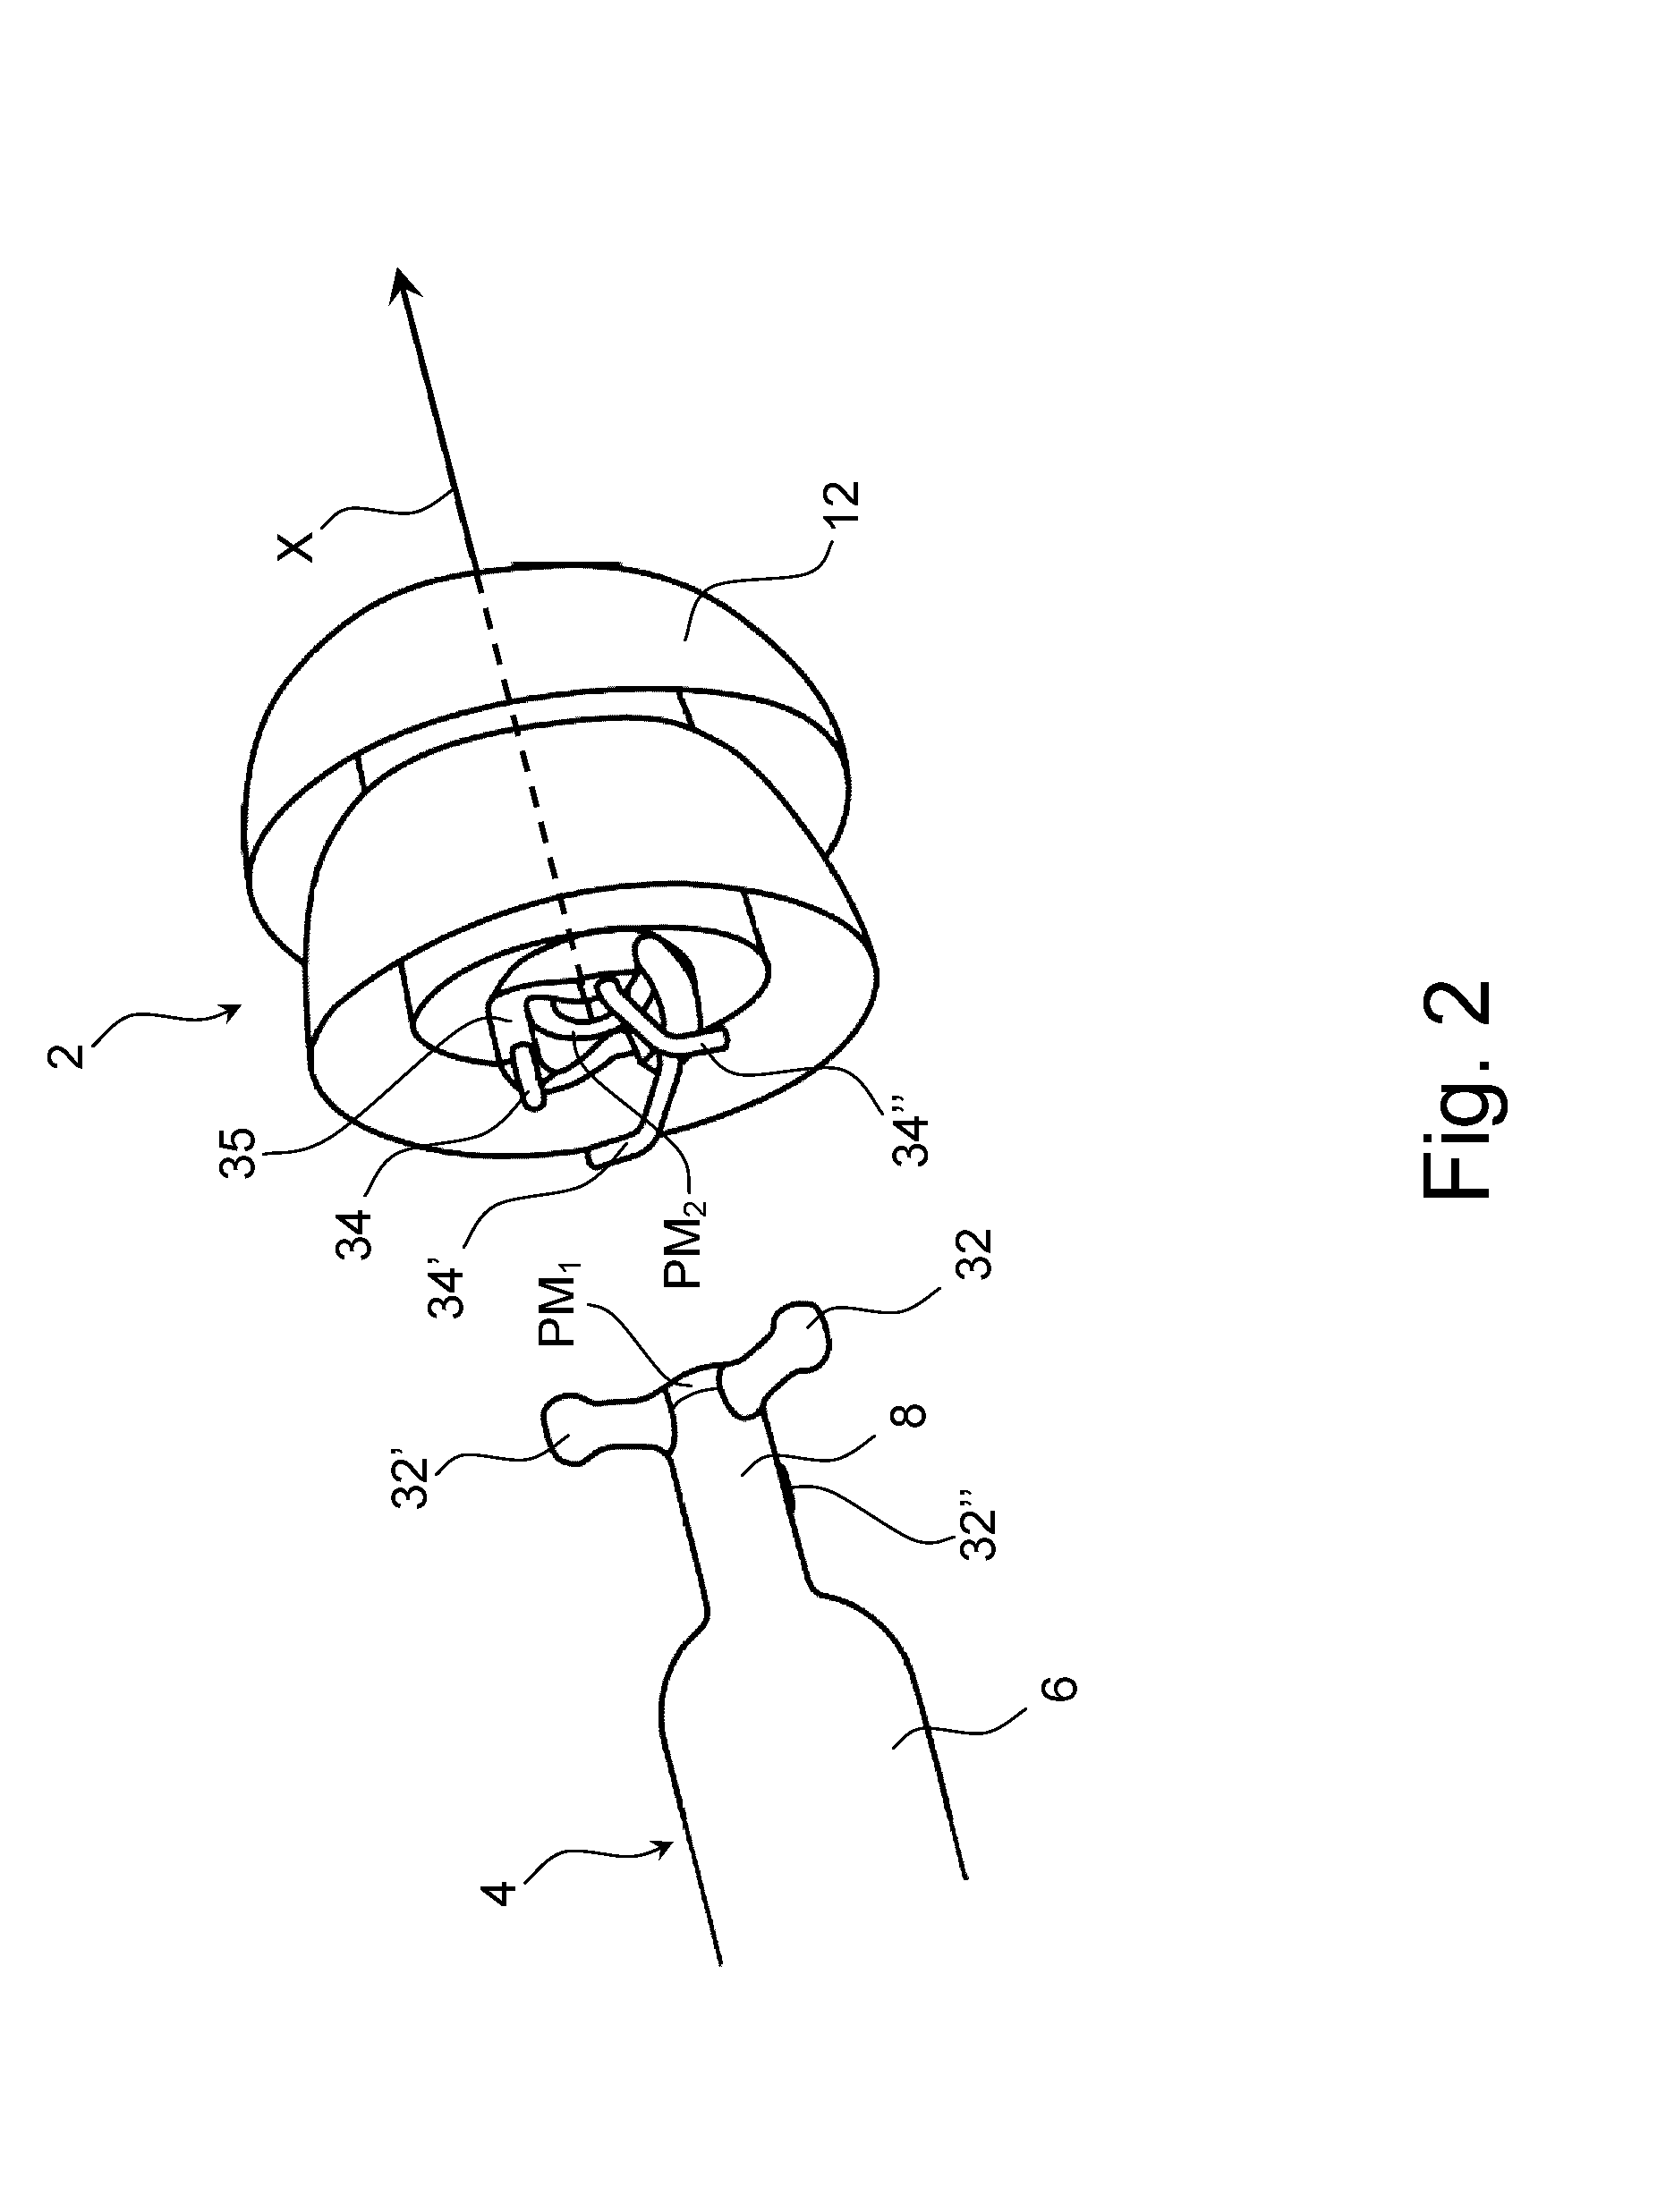 Hearing aid device and hearing aid device system